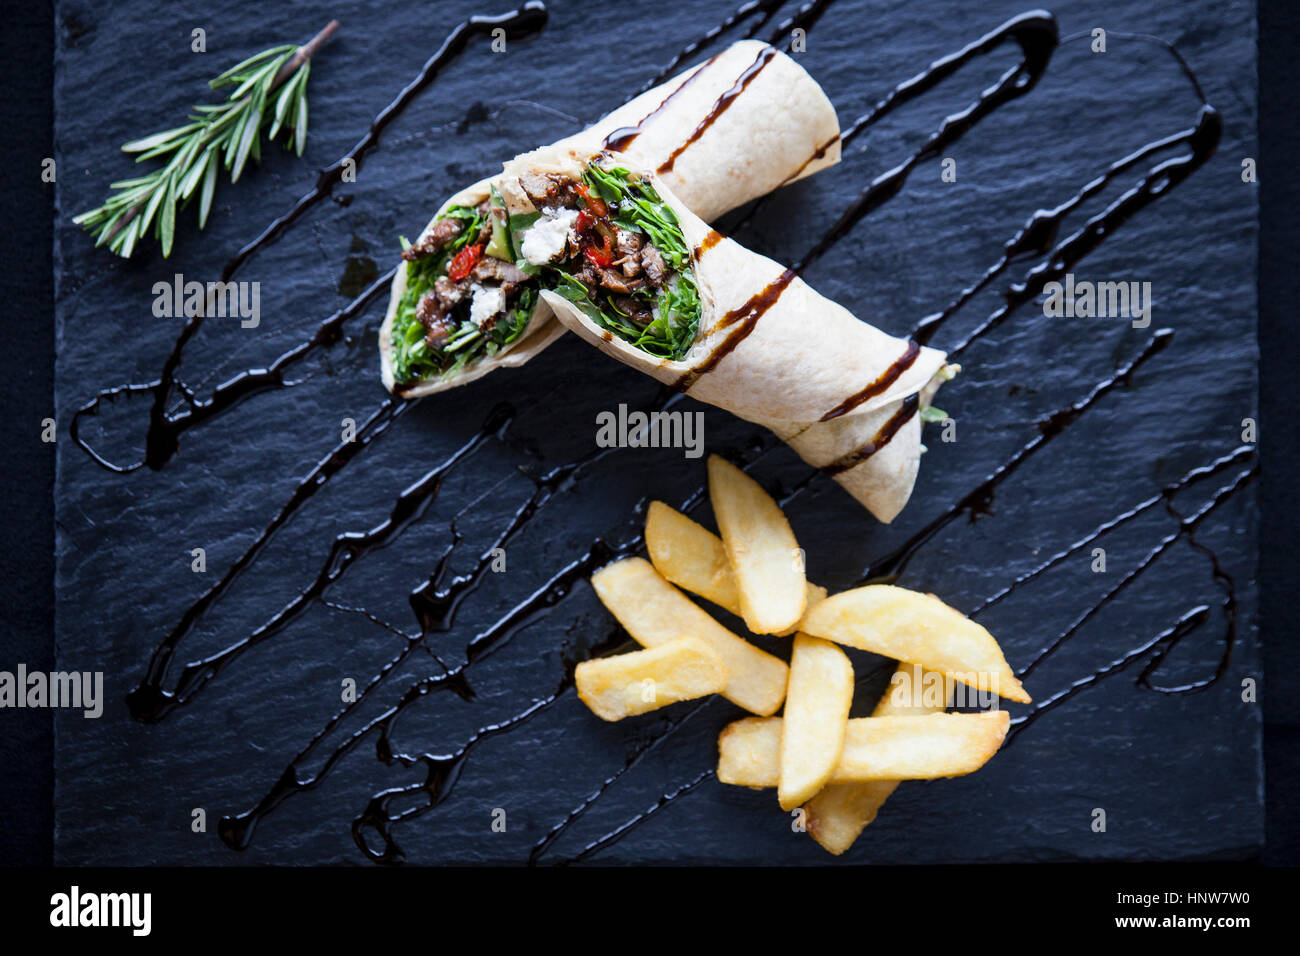 Overhead view of tortilla wraps with chips and sauce garnish on slate Stock Photo